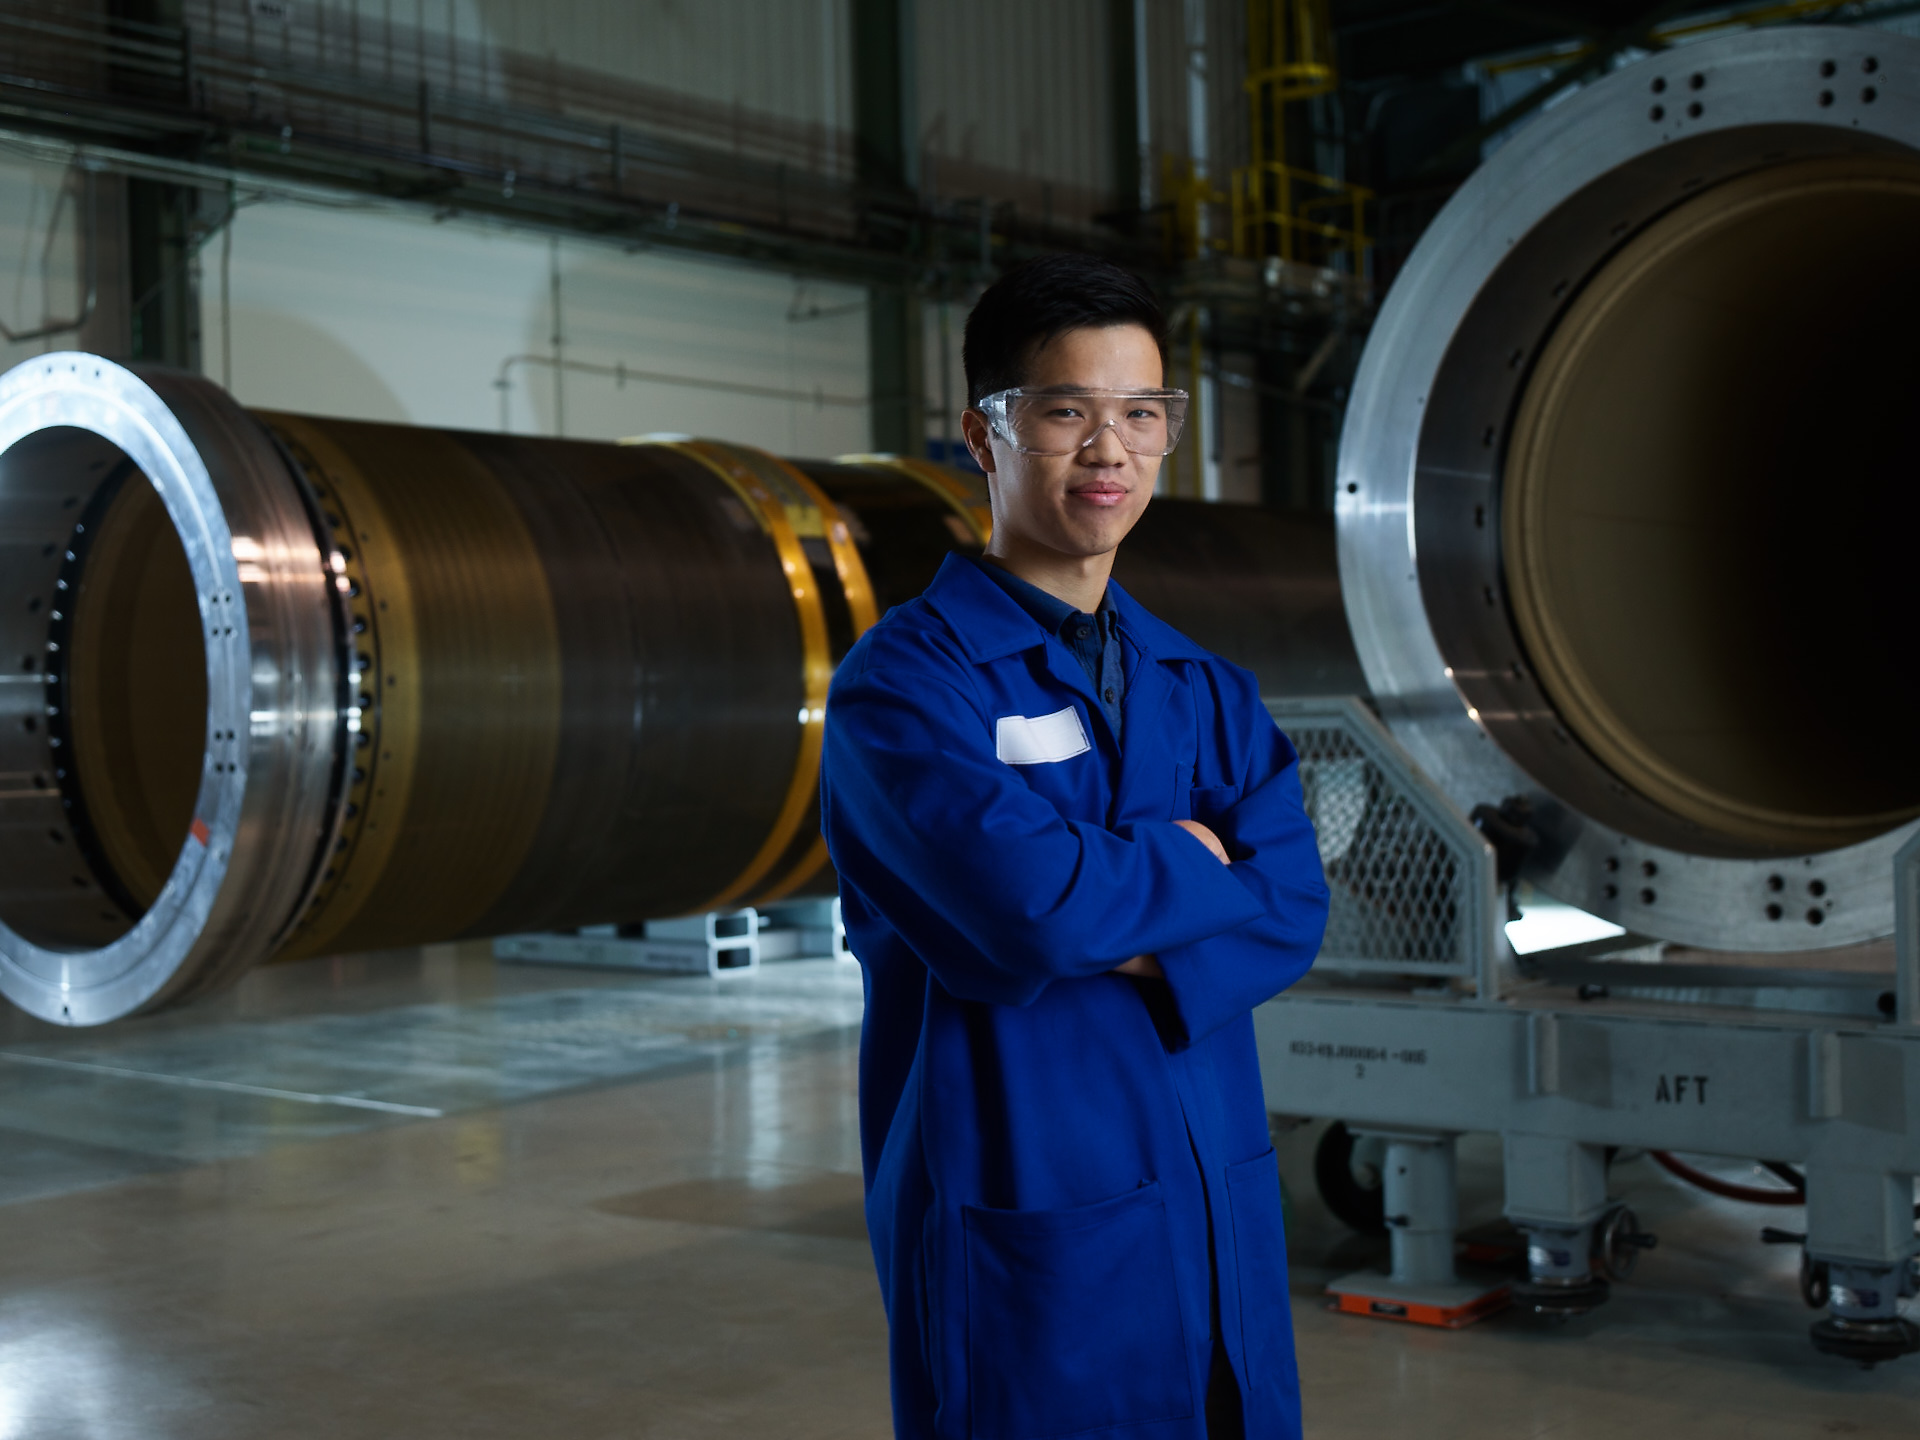 Asian male in blue lab coat and safety goggles stands in manufacturing plant in front of rocket motor frames.